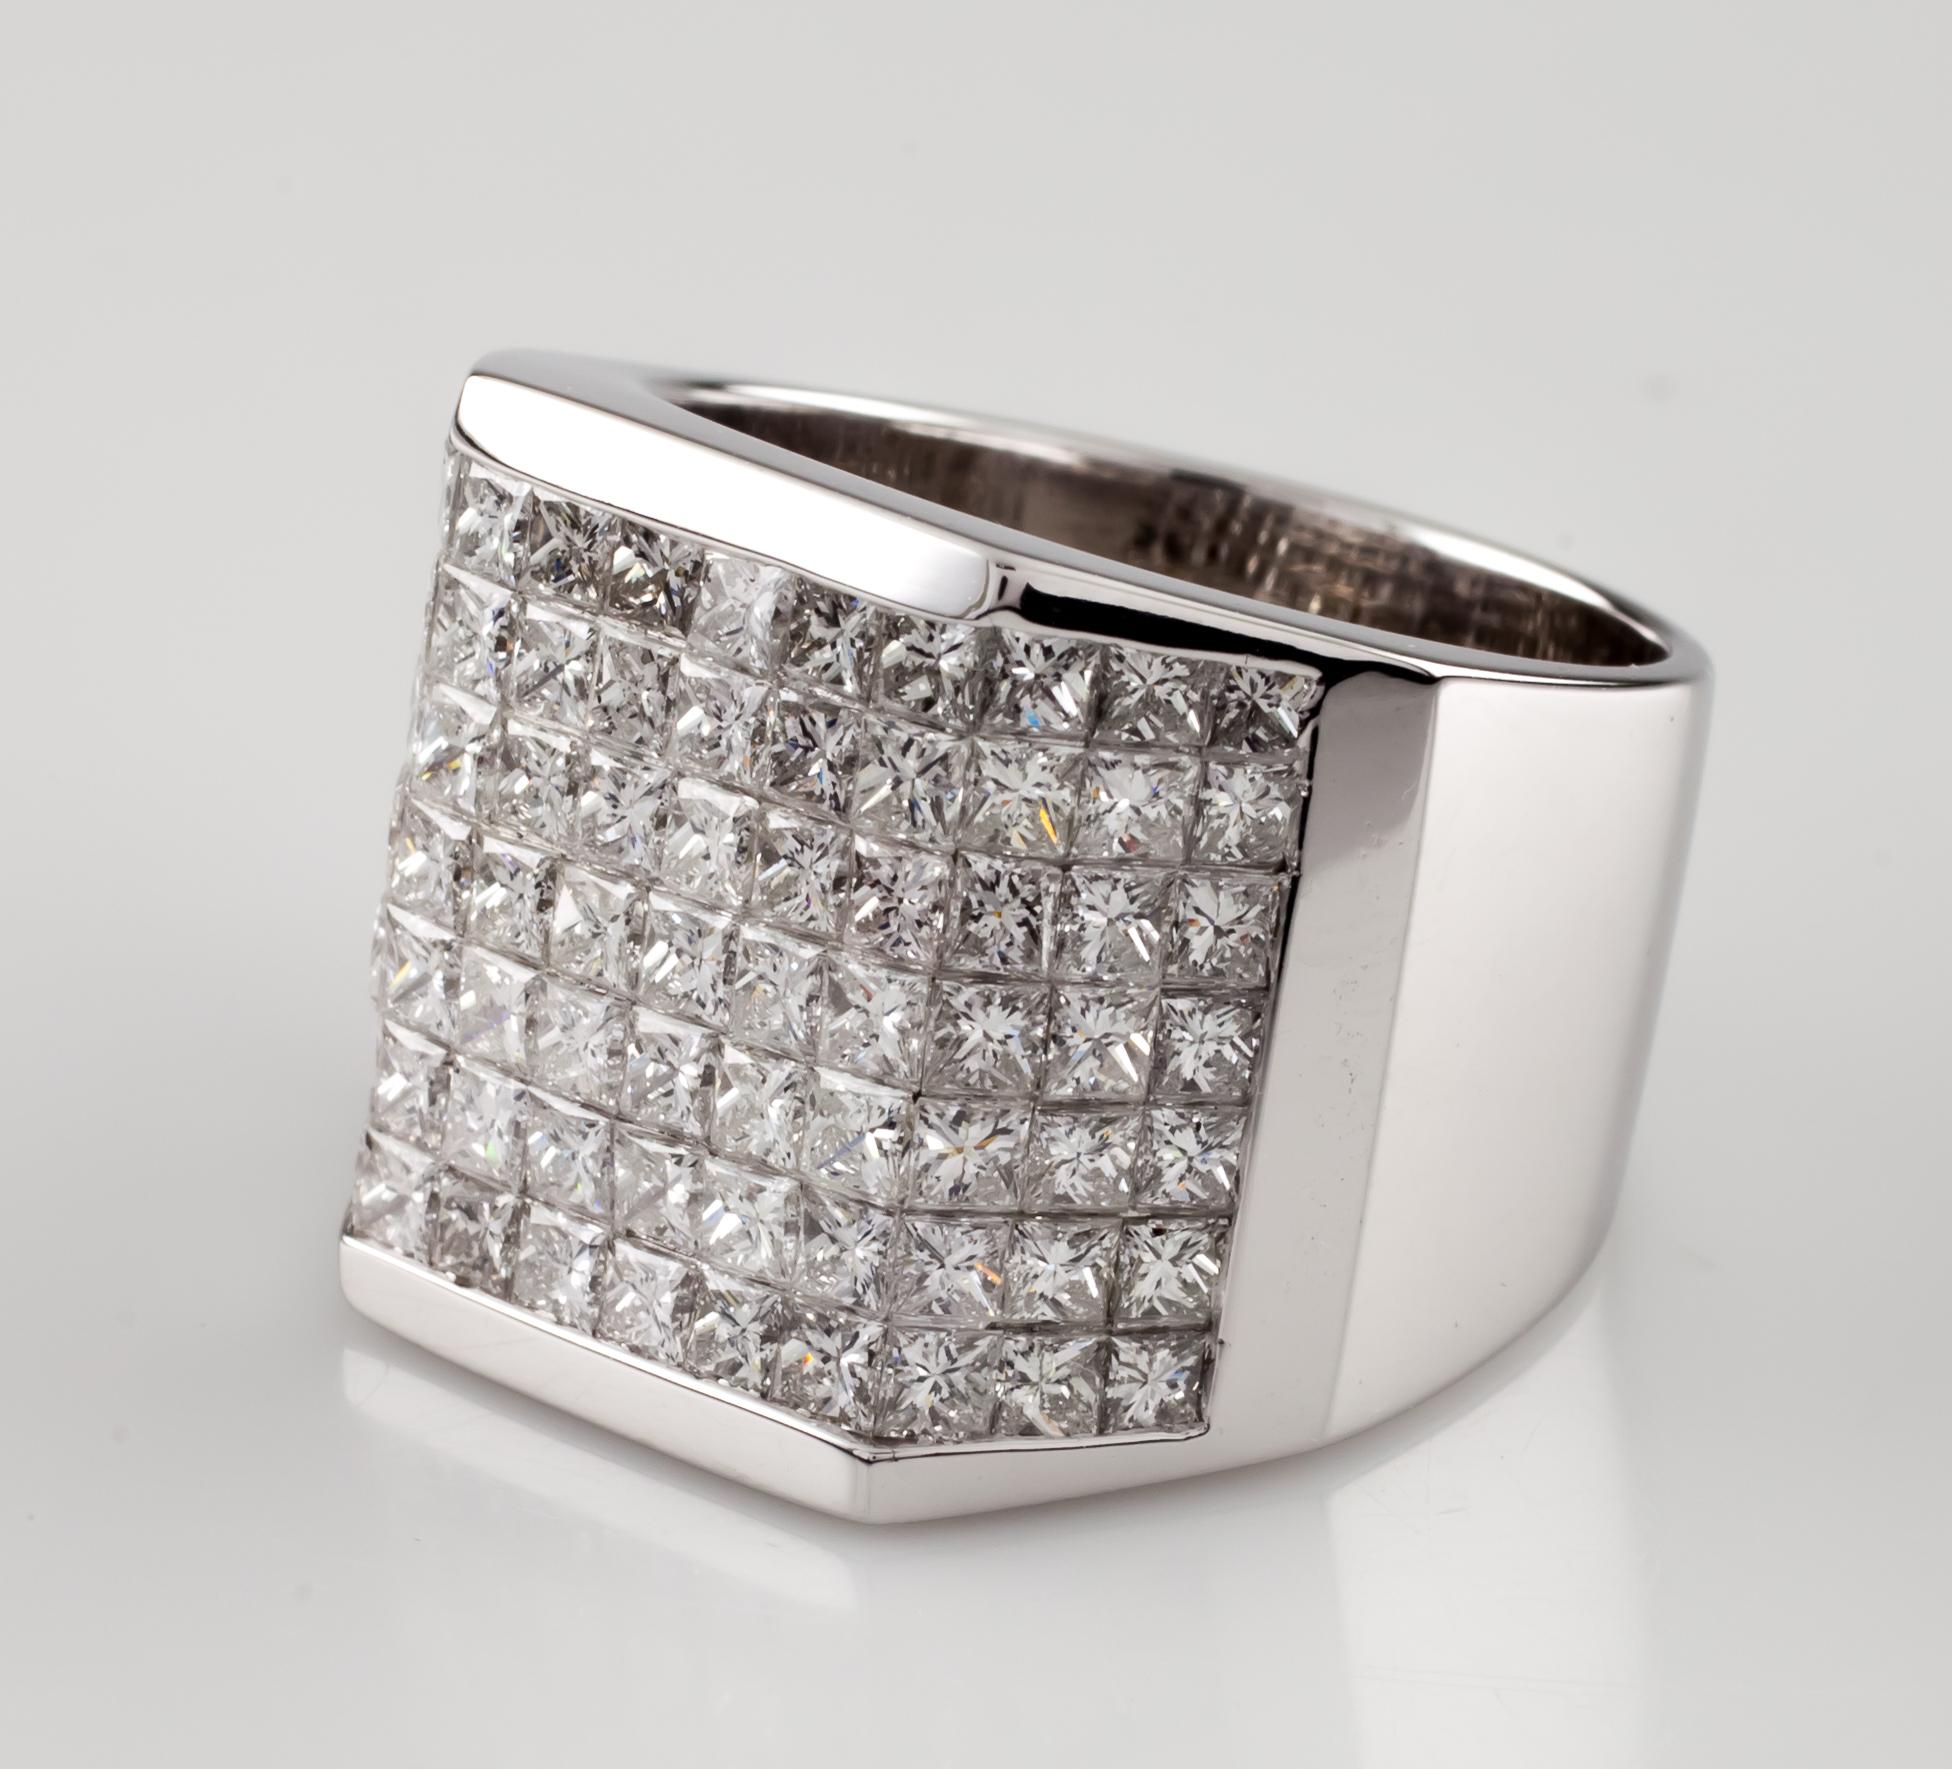 Large 18k White Gold Diamond Plaque Ring
Features Beveled Plaque of Invisible-Set Princess Cut Diamonds
Dimensions of Plaque = 18 mm Long
Center Section = 15 mm Wide, Wing Sections = 7.5 mm Wide
Total Diamonds Weight: Approximately 14